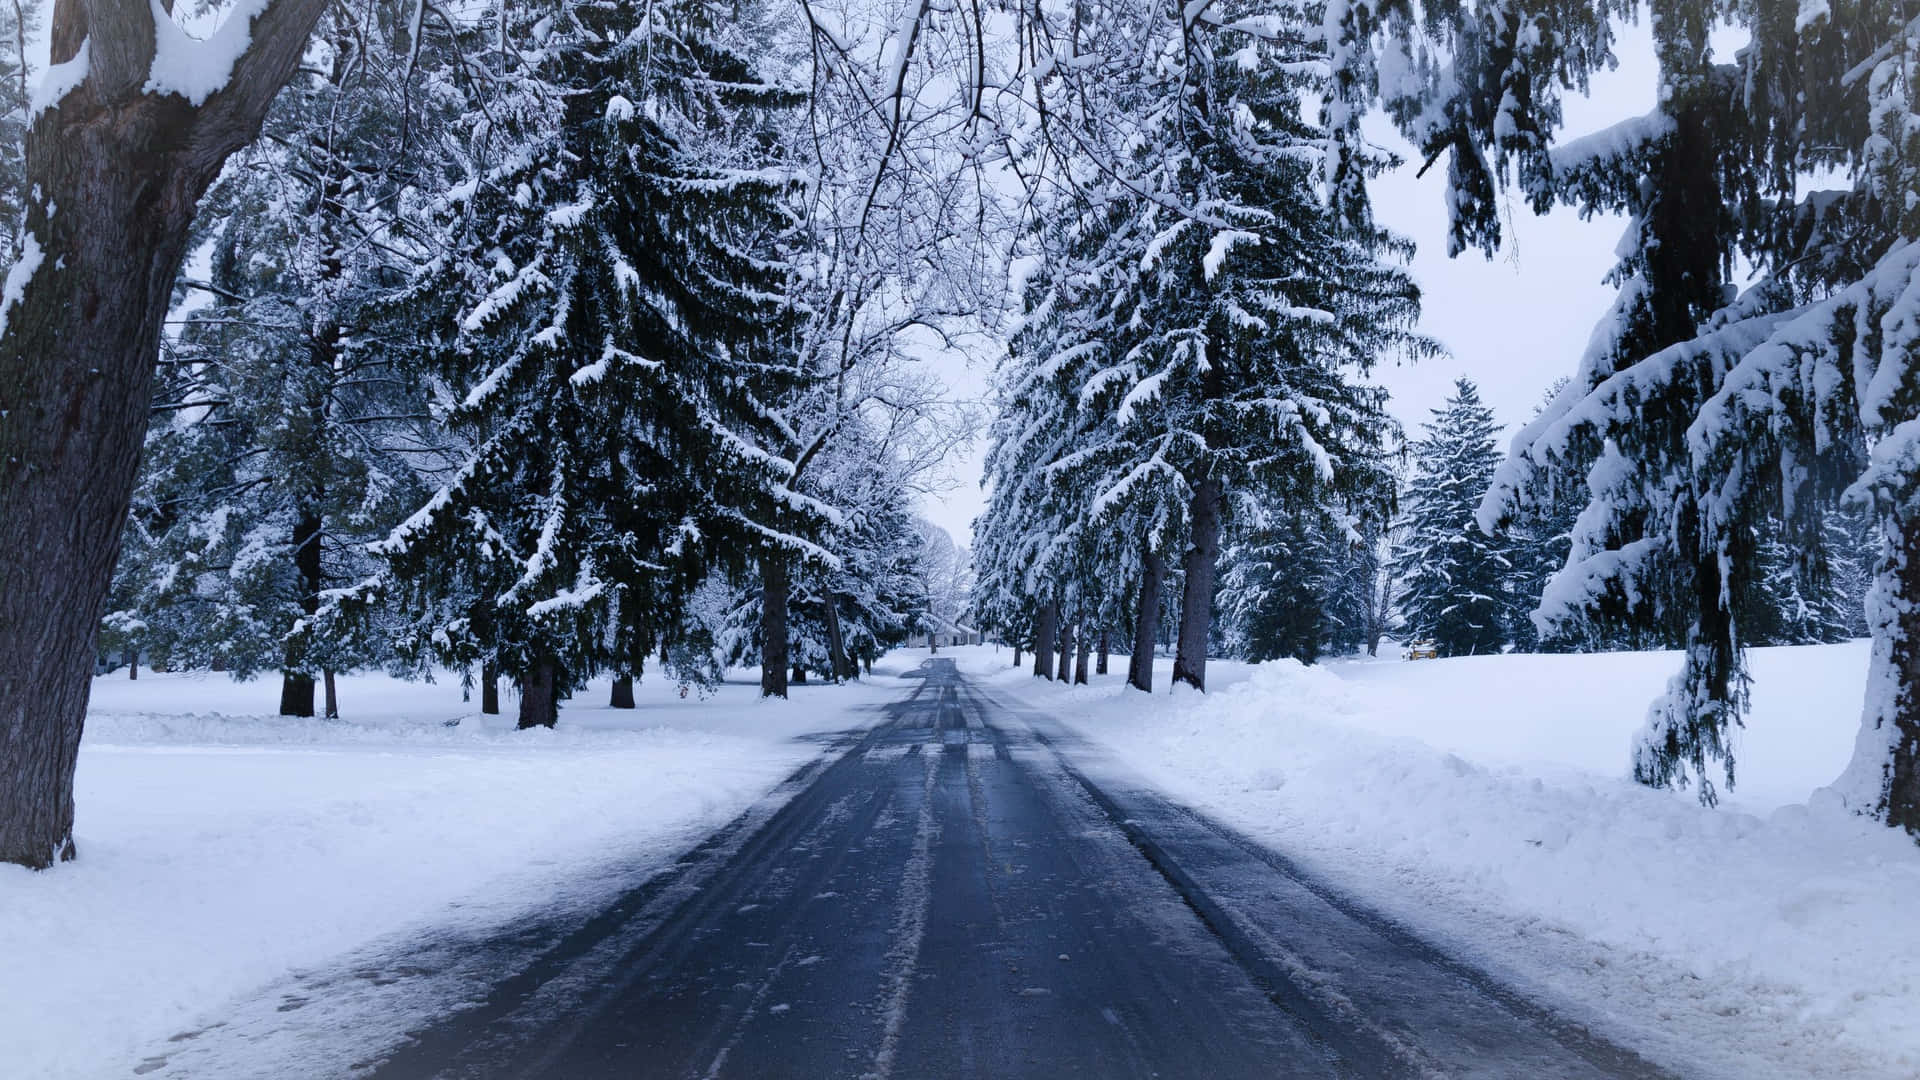 Icy winter road surrounded by snow-covered trees Wallpaper